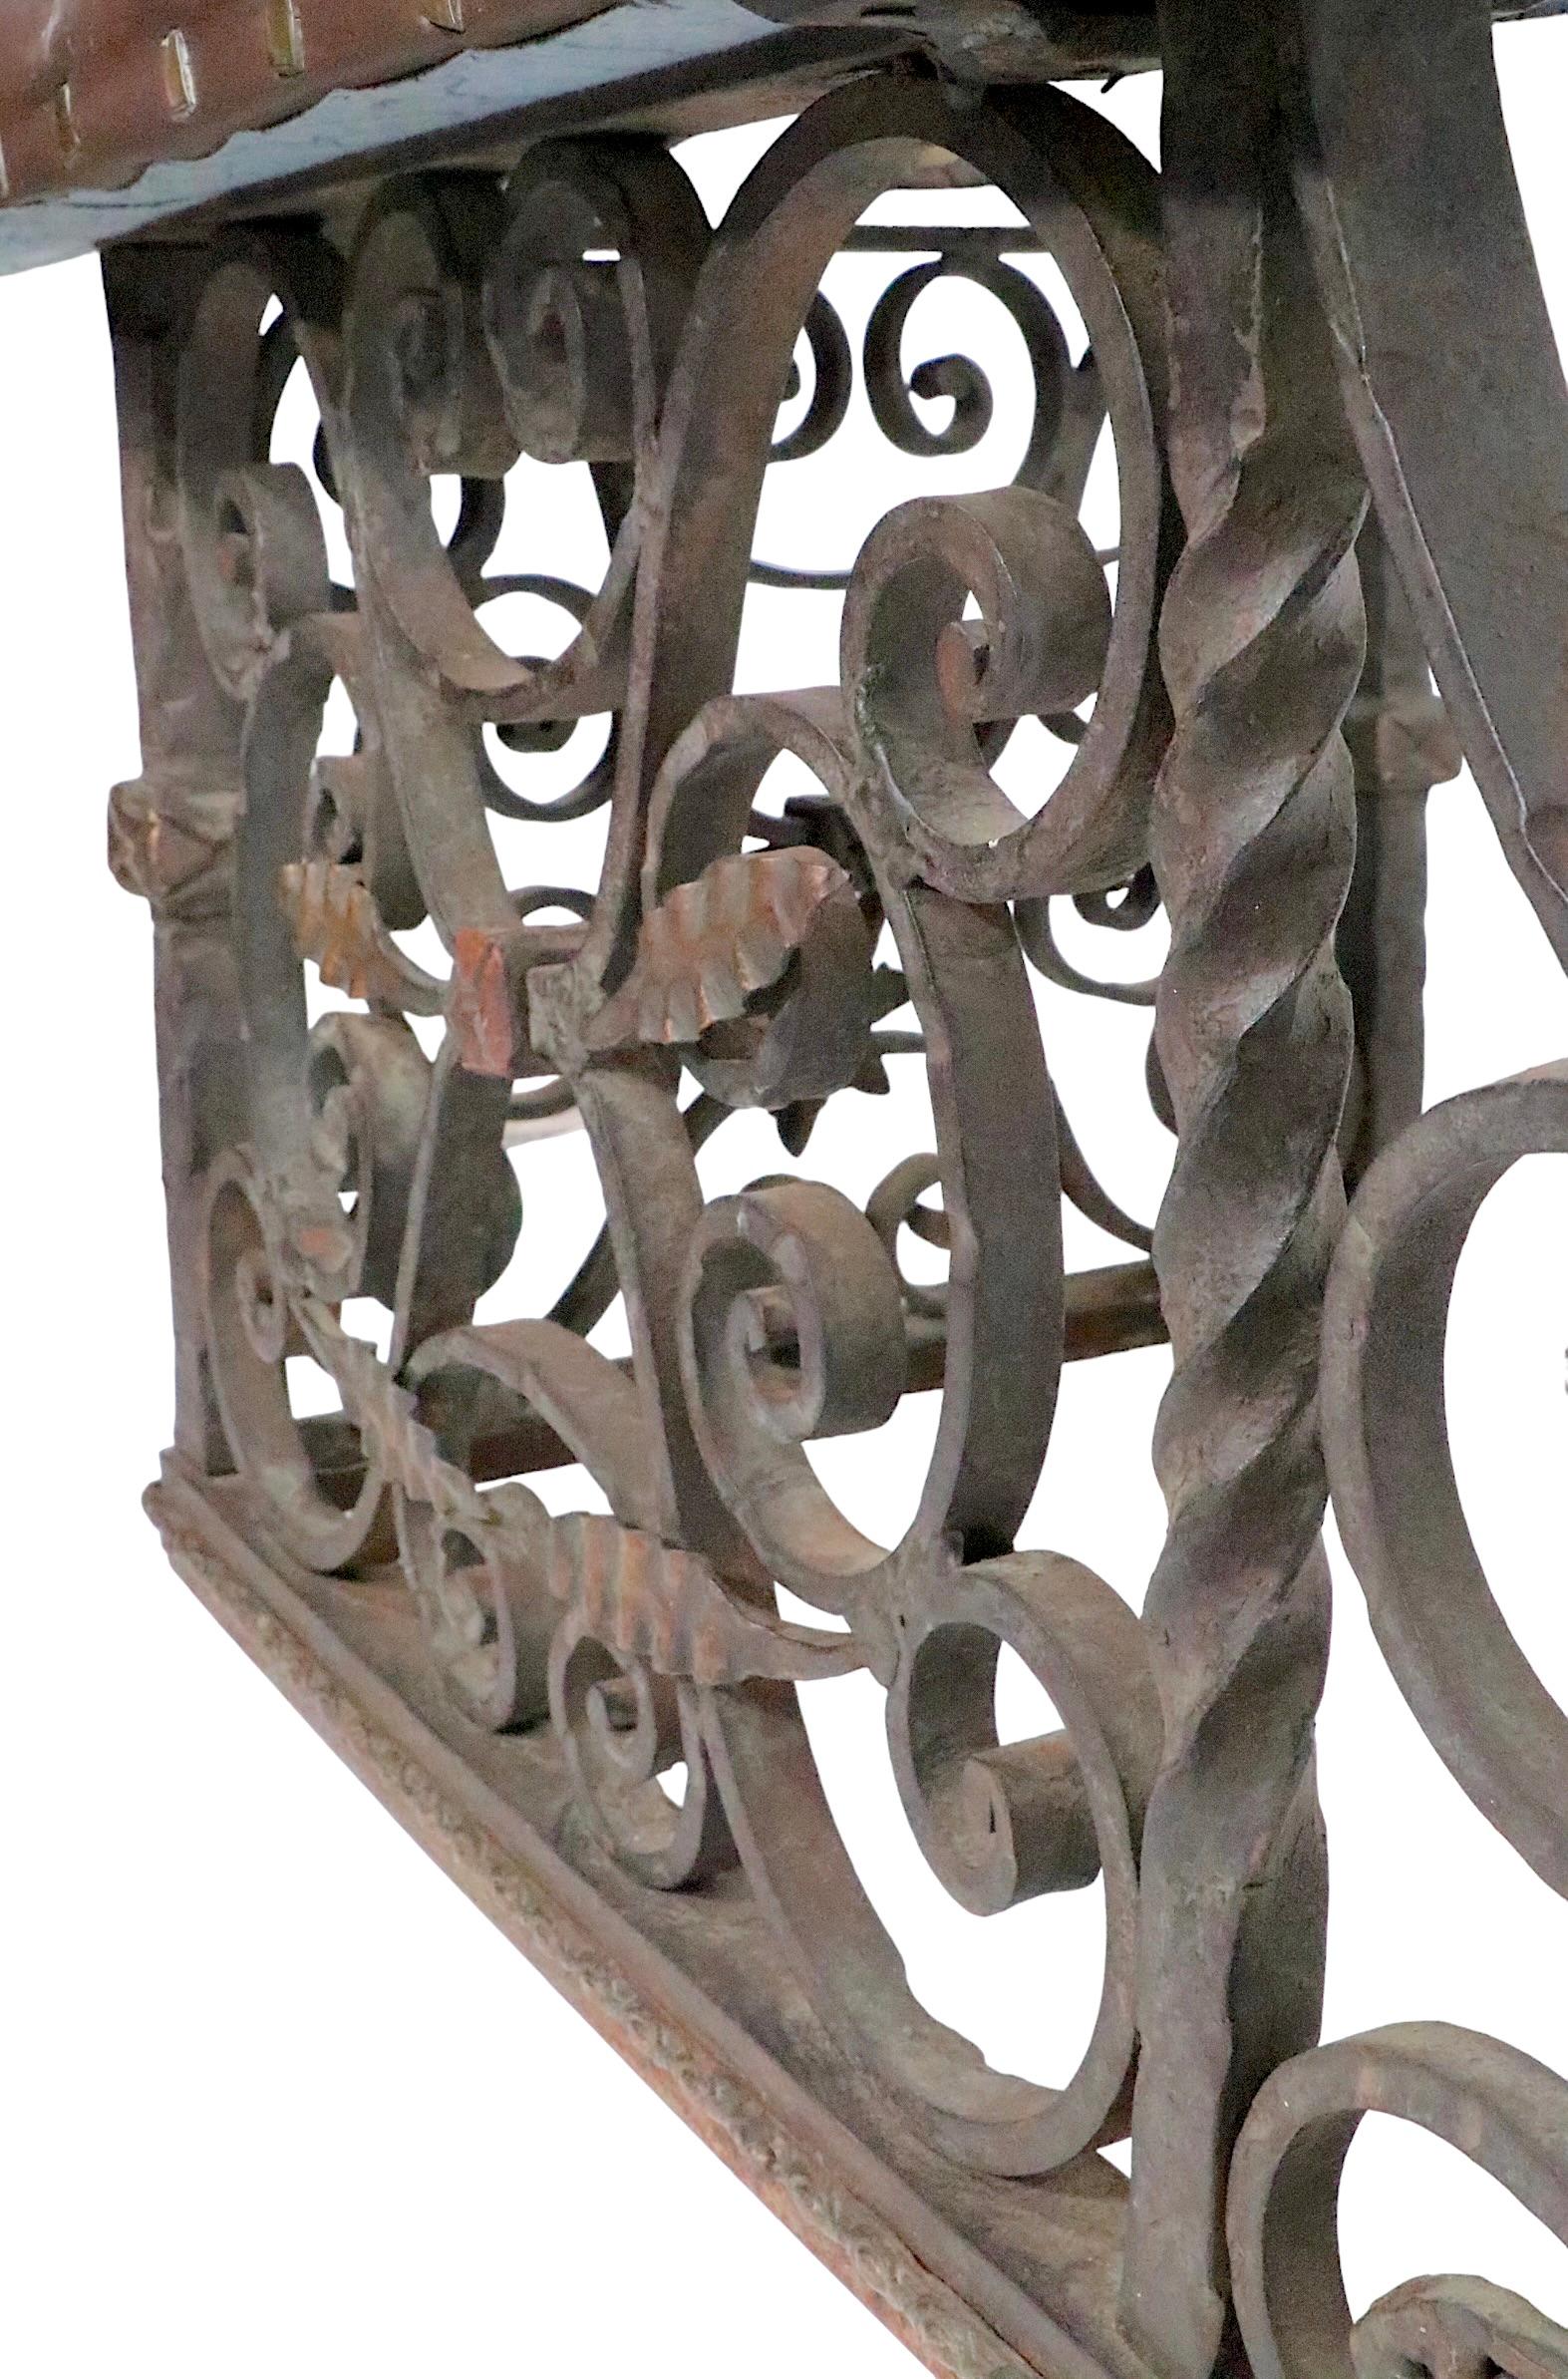 Exceptional wrought iron club, or bench, fender having ornate metal work and an upholstered bench seat ( later, but not new vinyl upholstery ). This impressive piece shows Spanish, Moorish, Gothic and Arts and Crafts influences. The quality of the